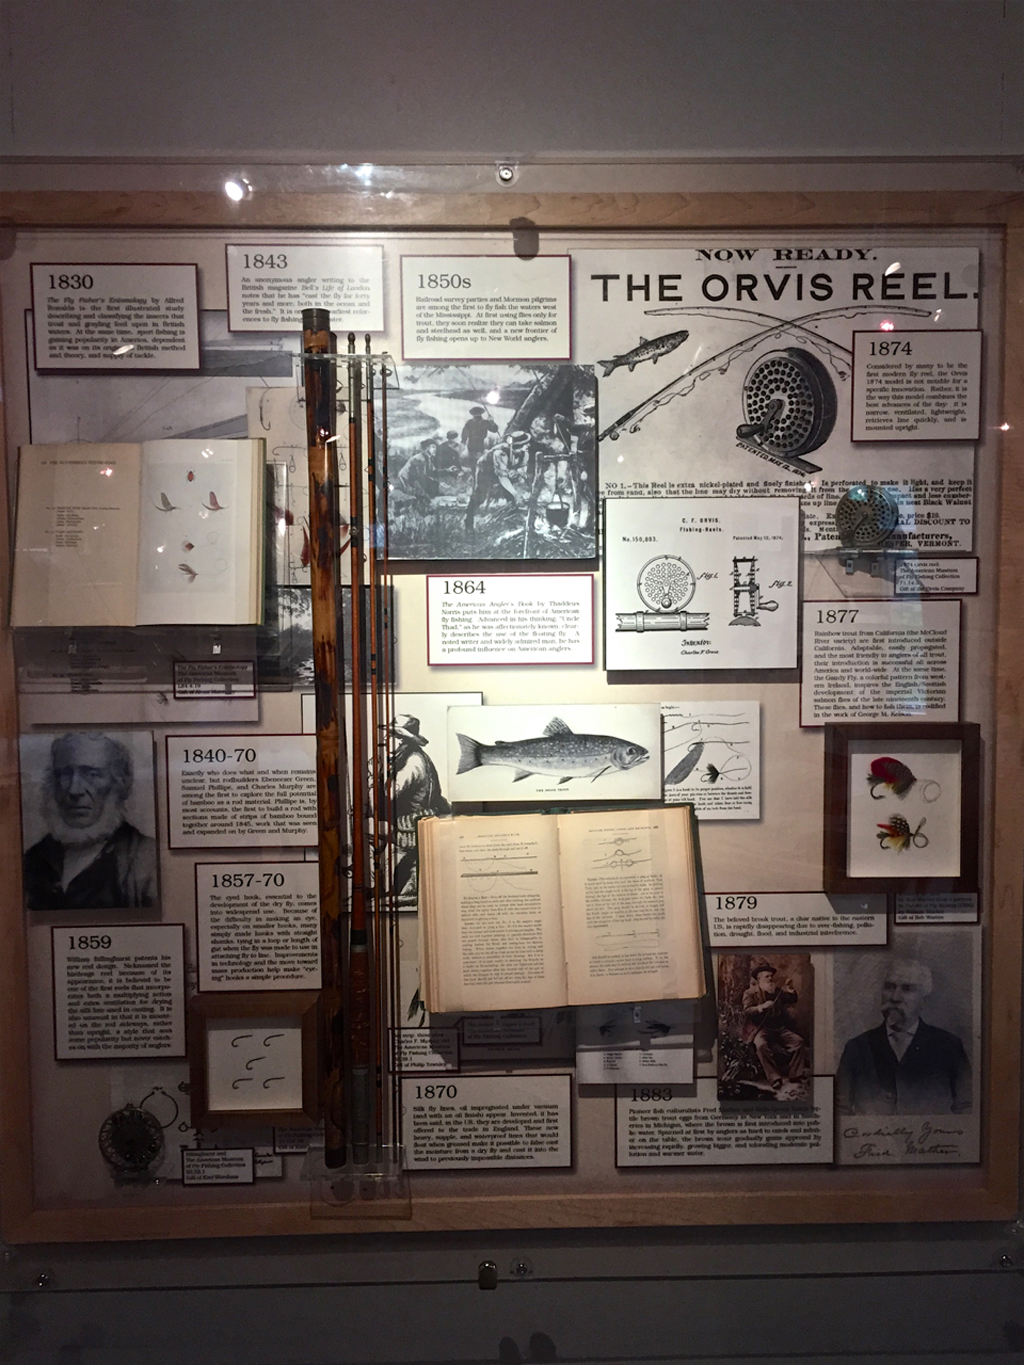 Orvis display at the American Museum of Fly Fishing.